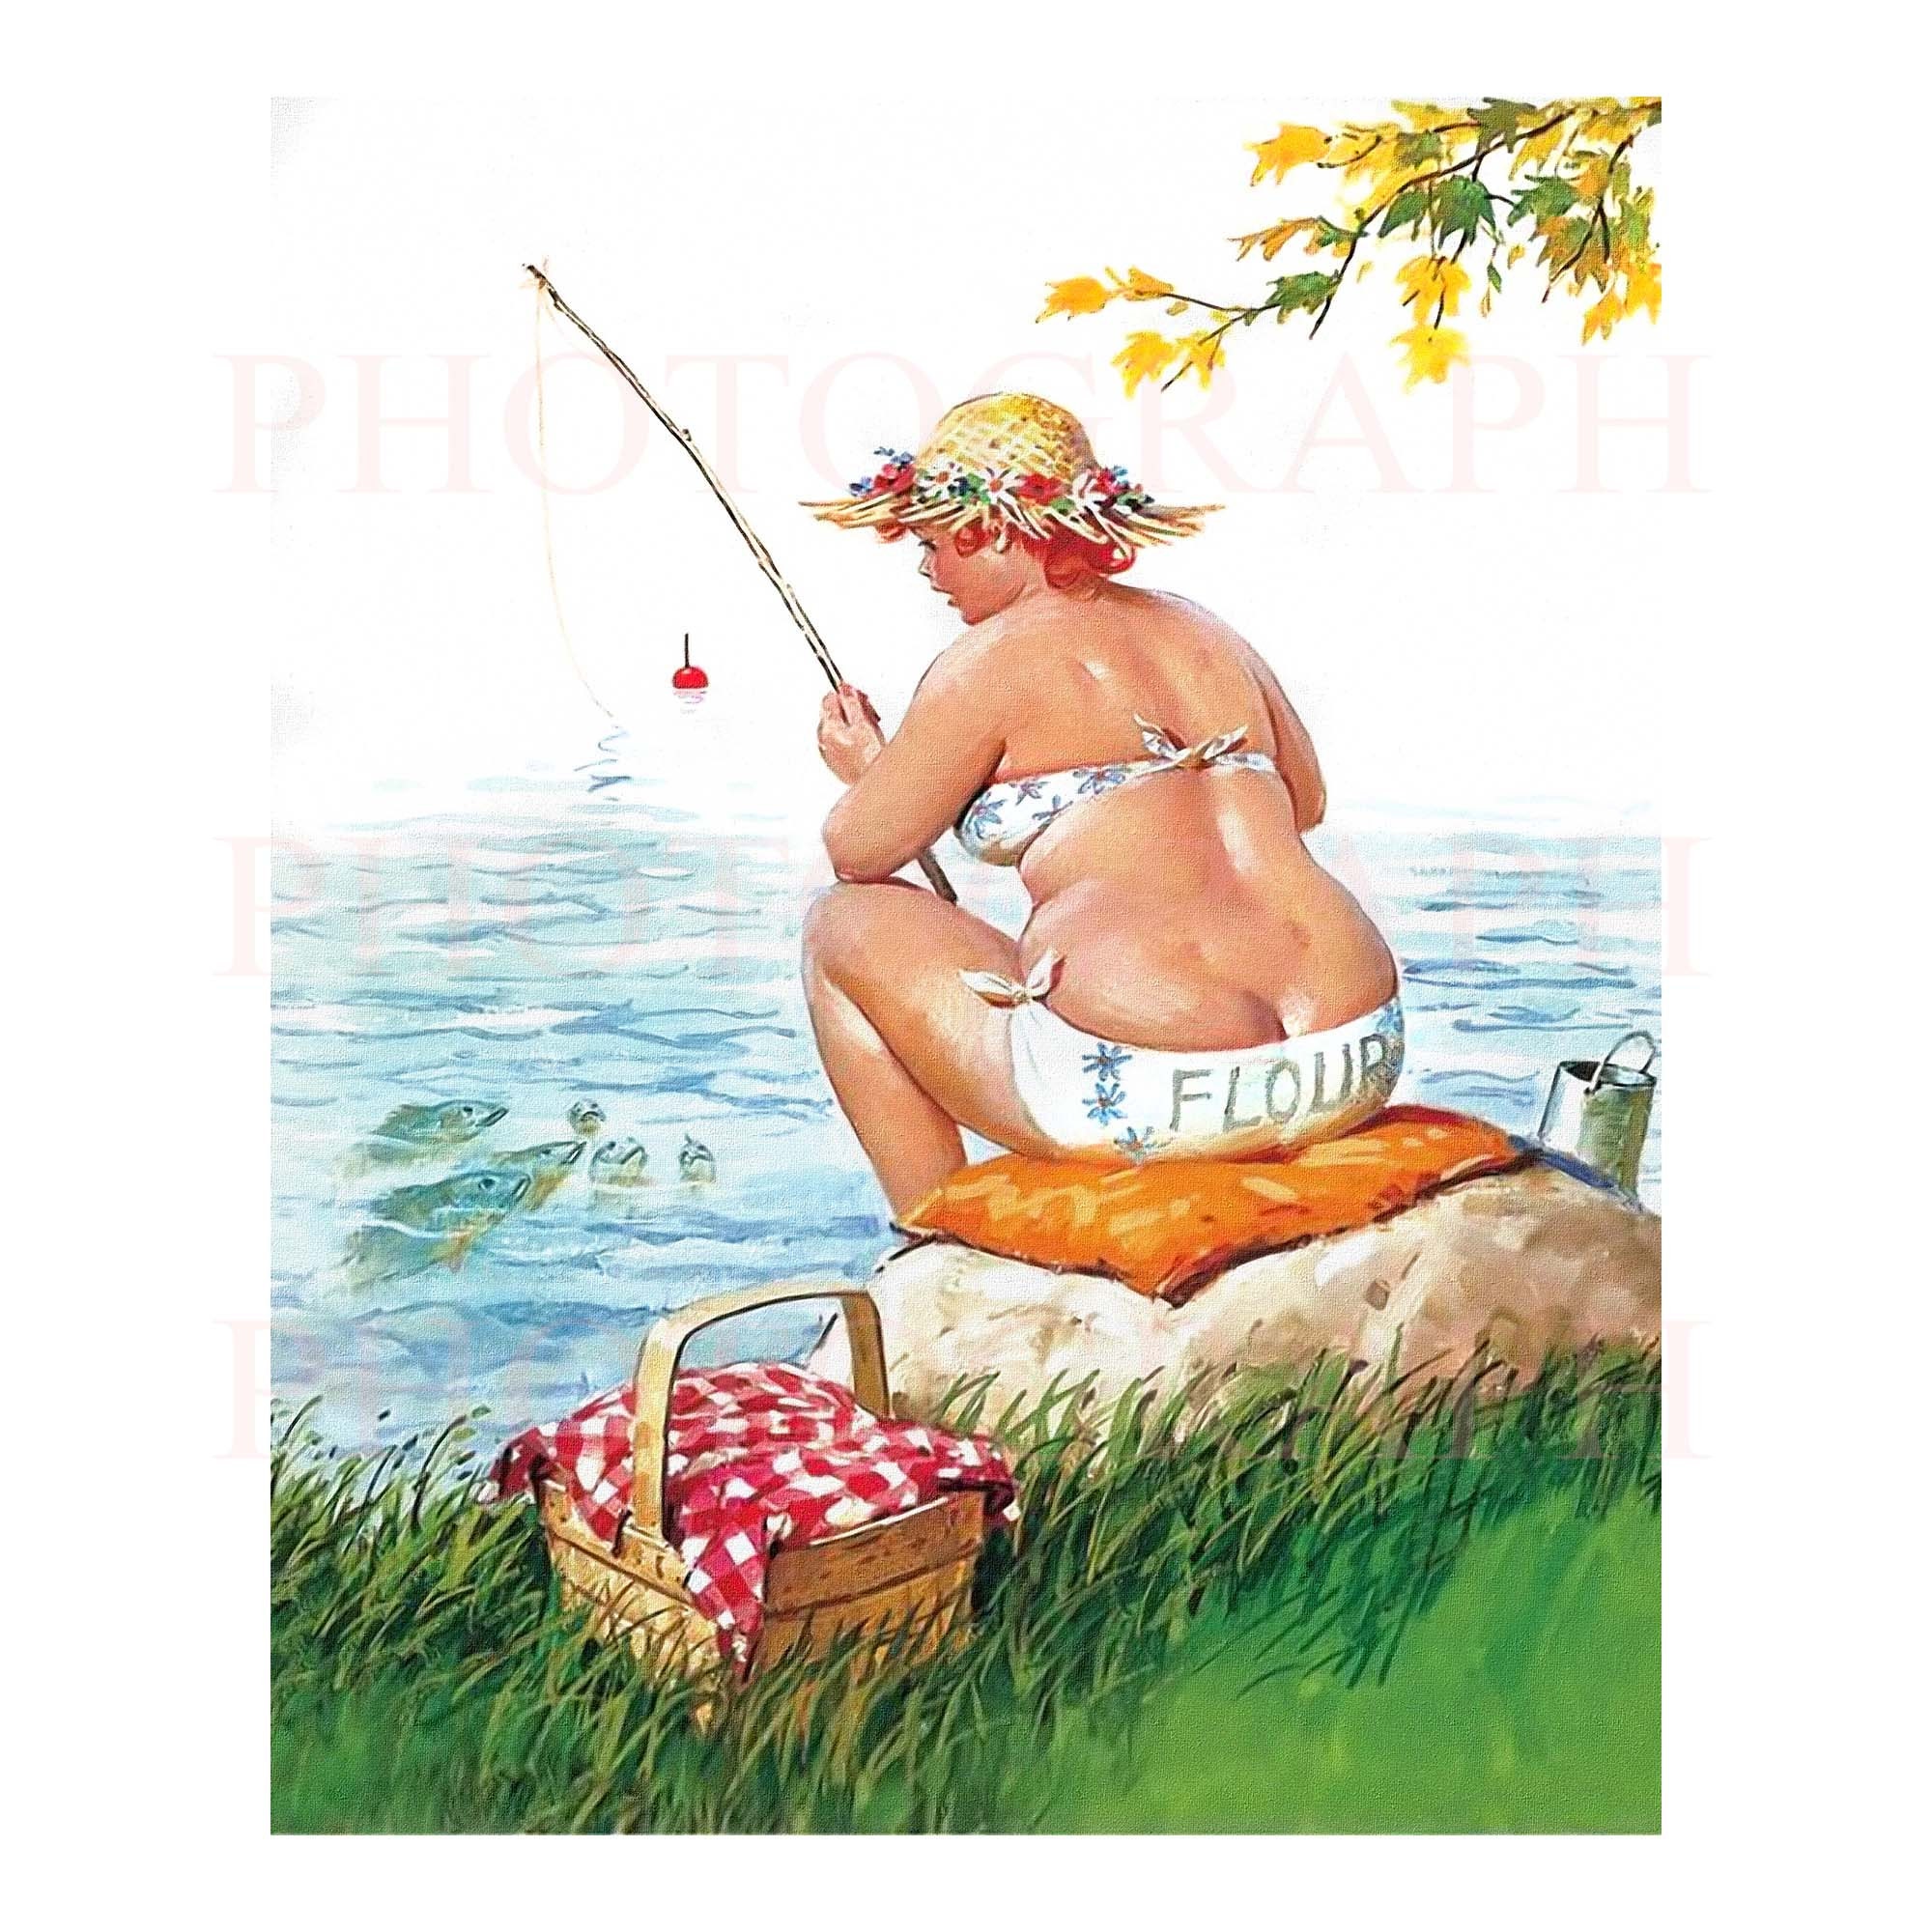 Hilda Pinup Fishing Still I Cant Catch a Thing Lovely Illustration